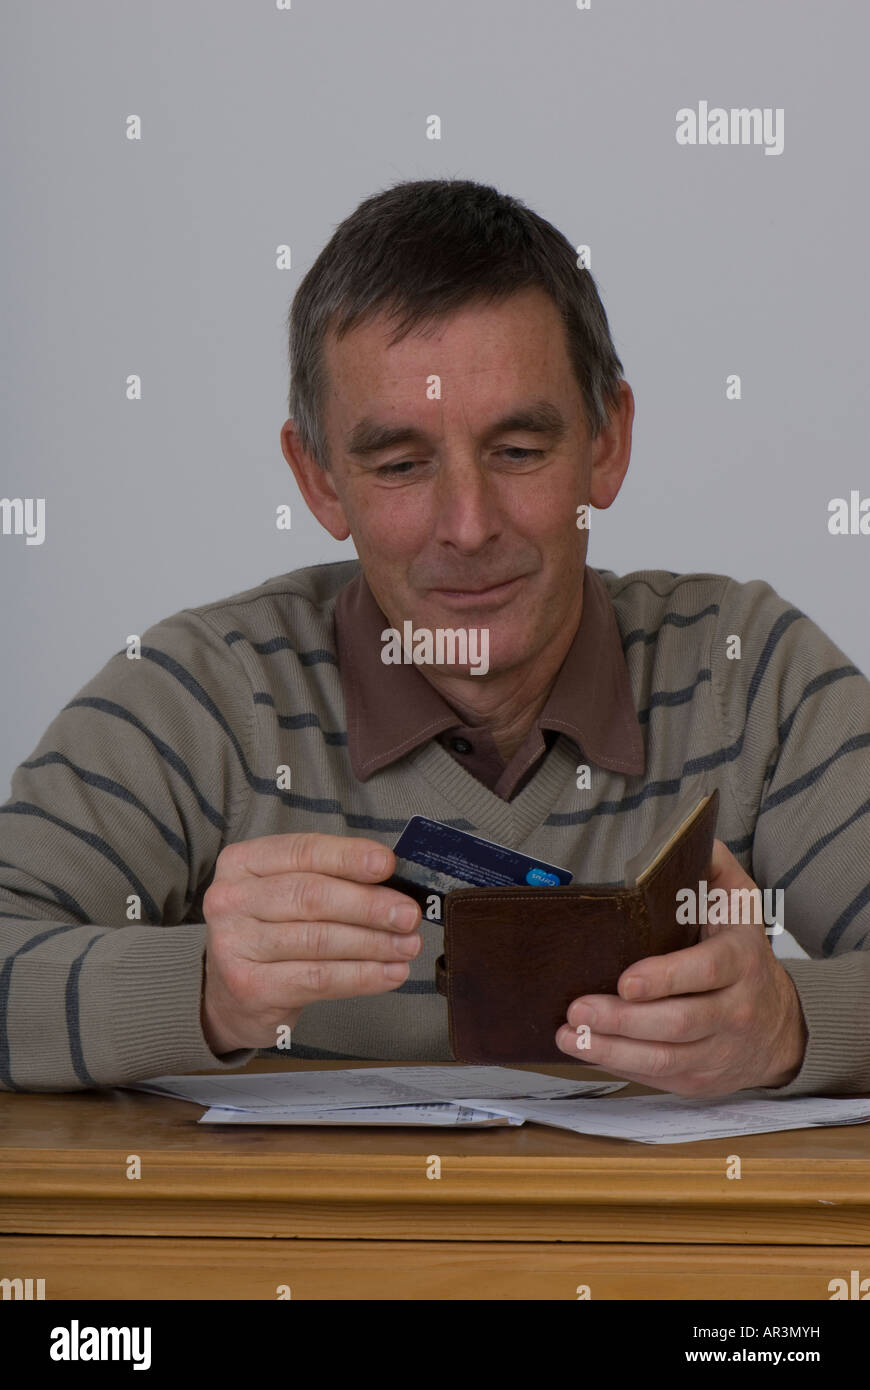 money worries mature male stressing over debt problems Stock Photo